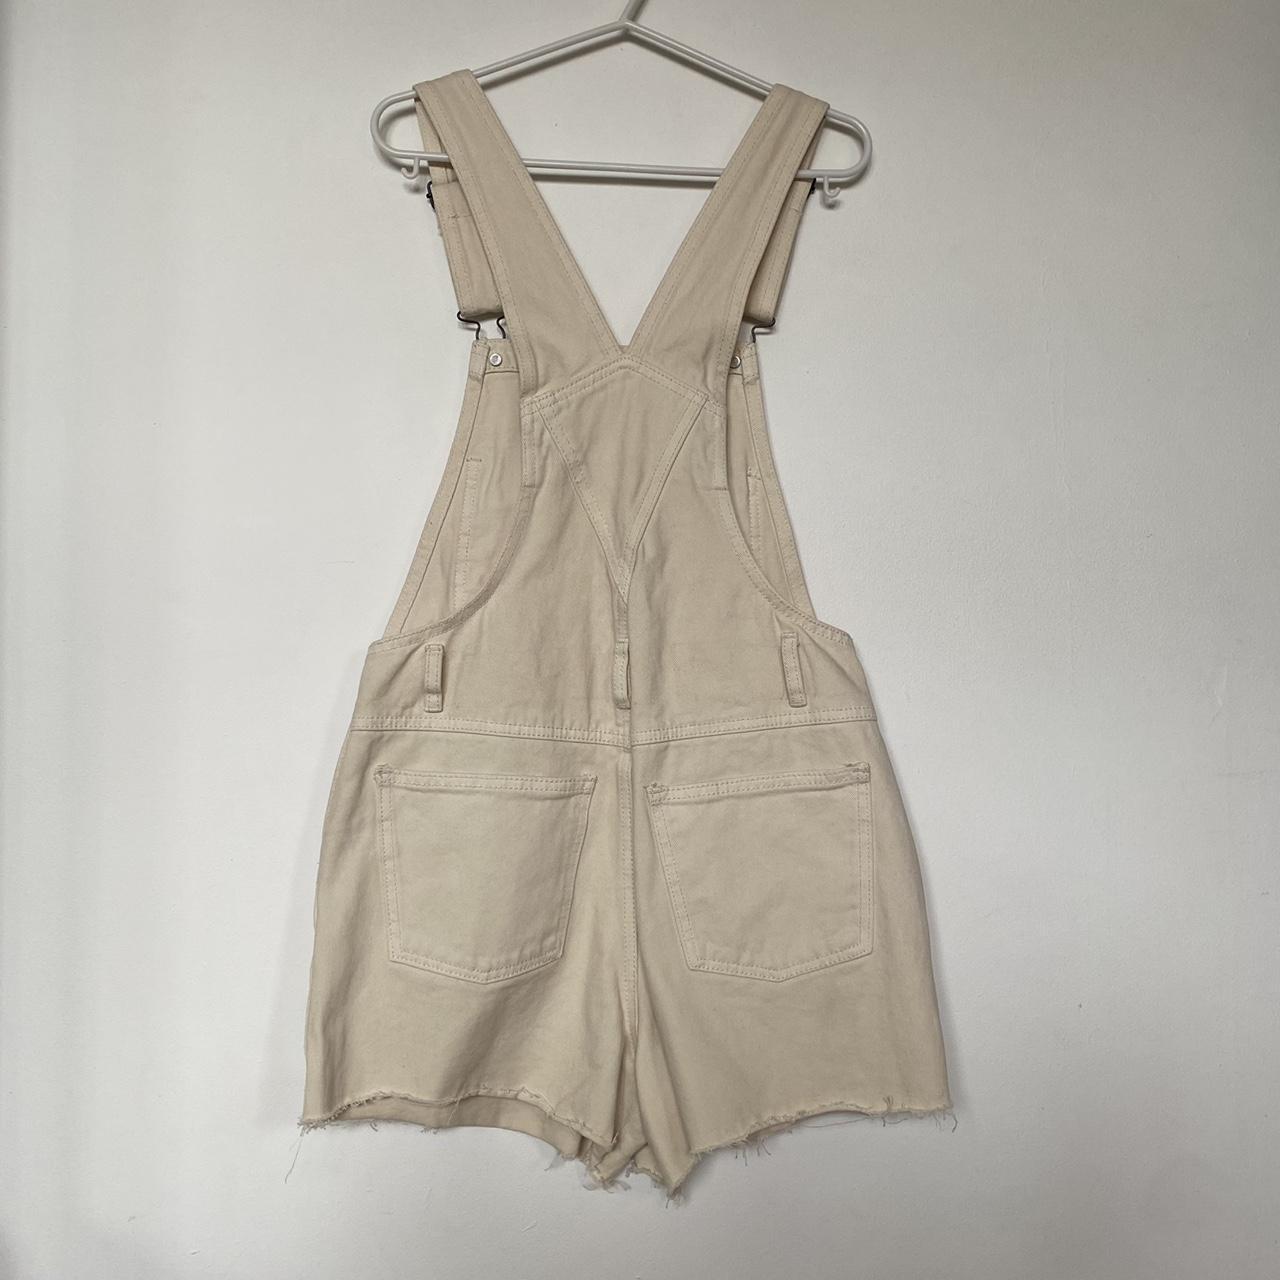 Selling these adorable, brand new, never worn, creme... - Depop